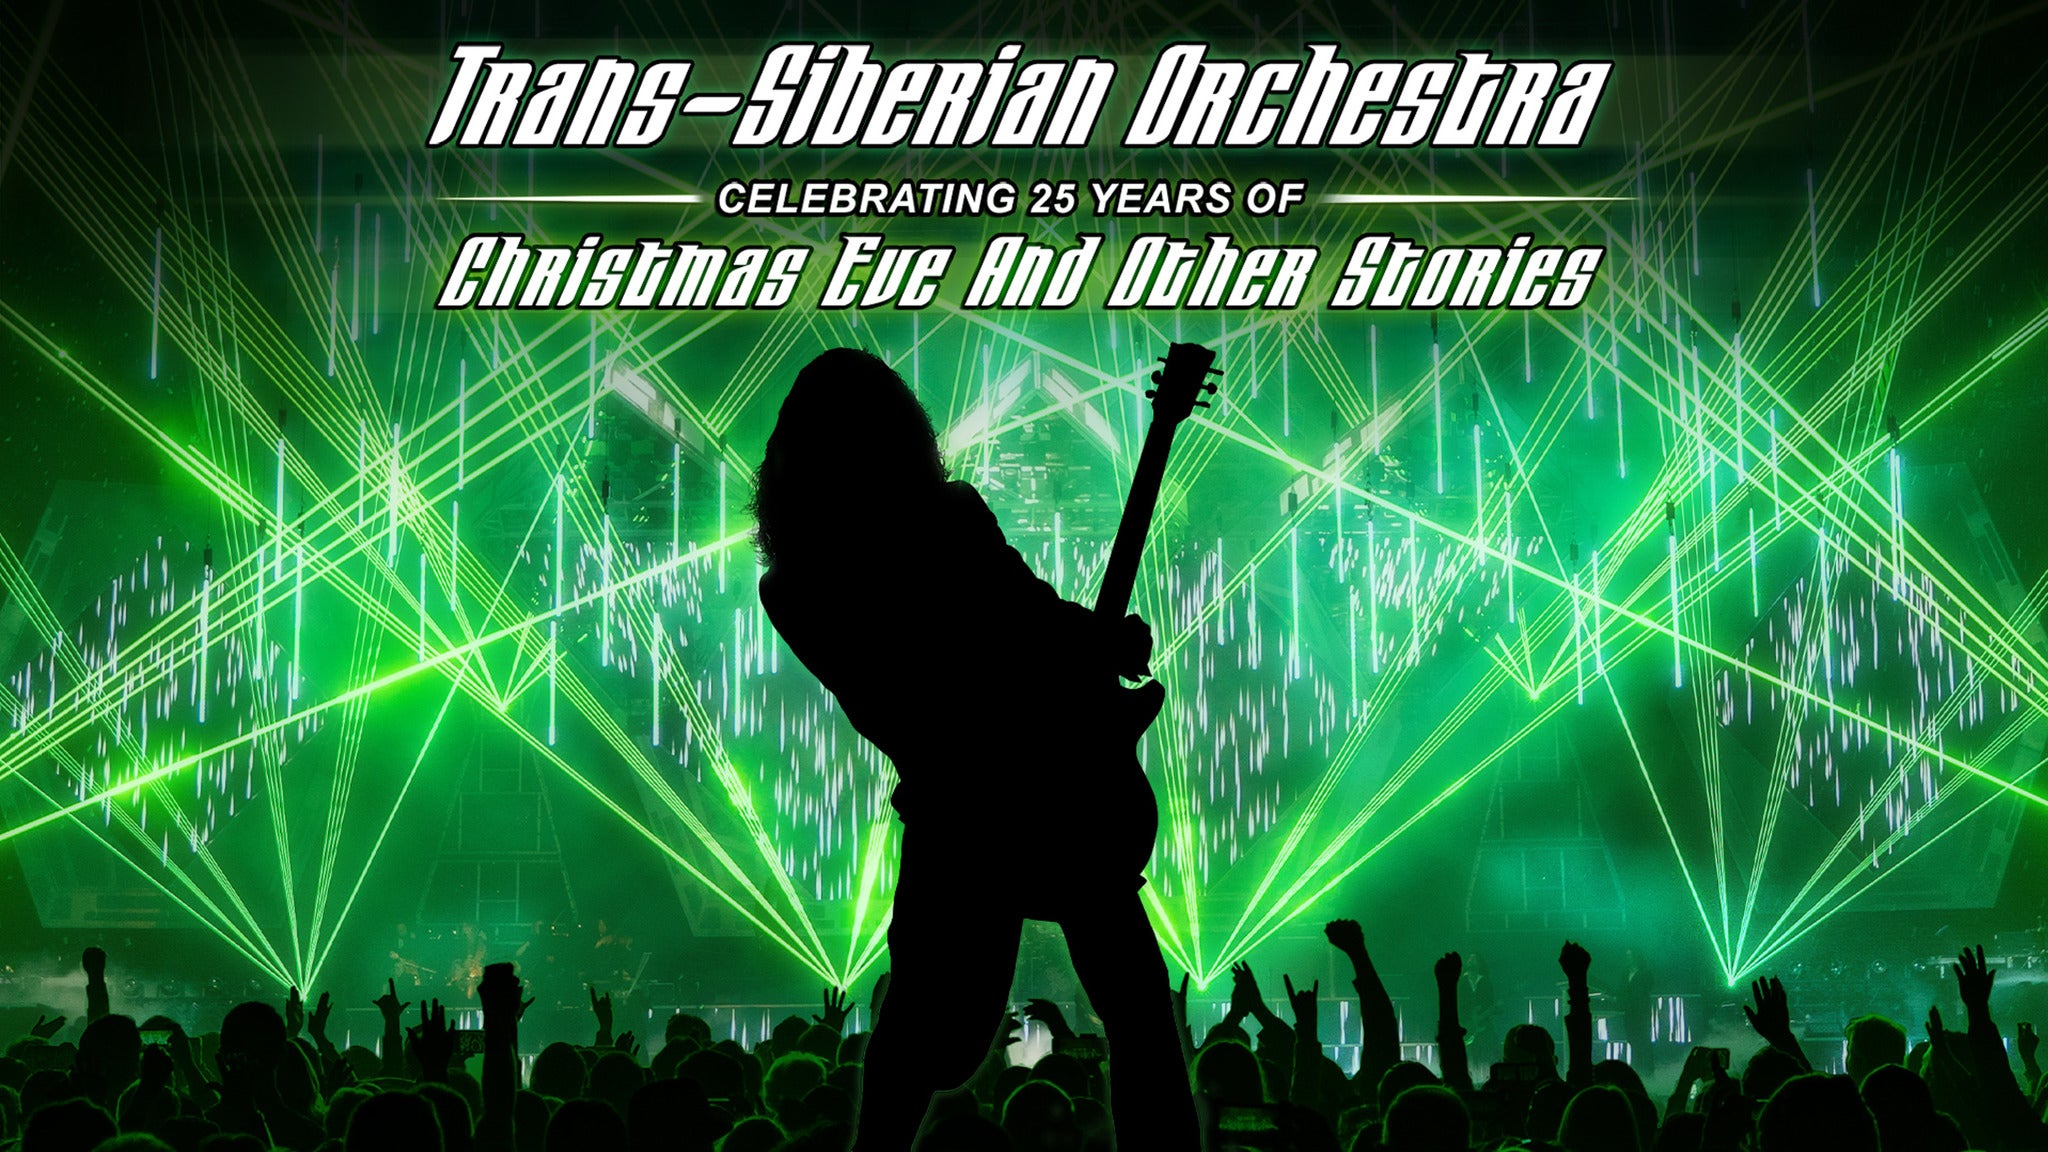 Trans-Siberian Orchestra-Christmas Eve & Other Stories in Orlando promo photo for Citi® Cardmember presale offer code